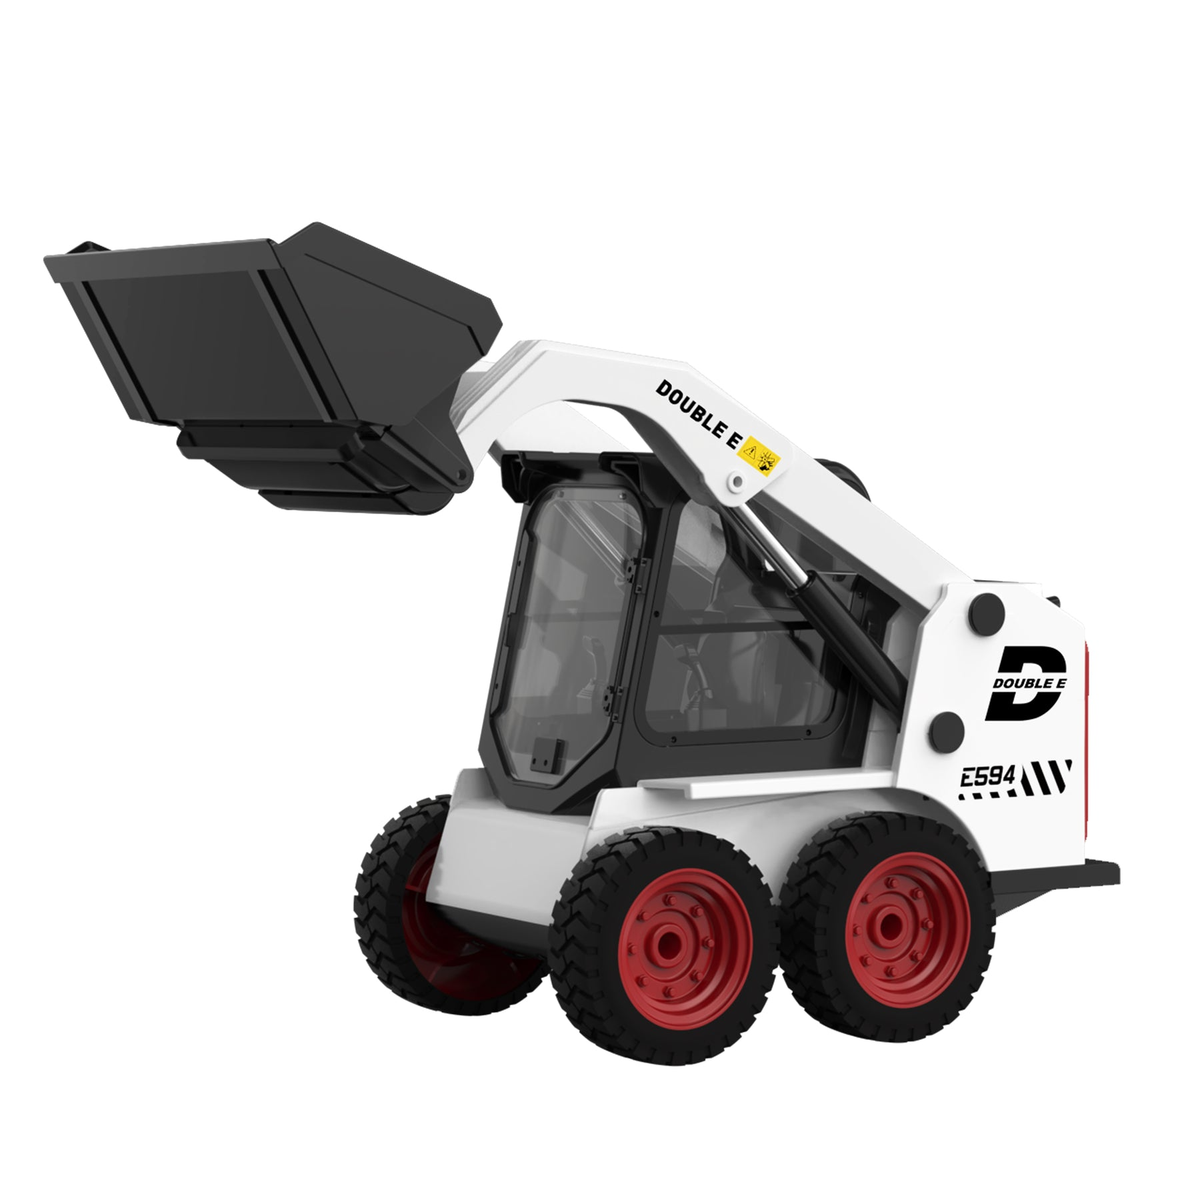 Double Eagle E594-003 2.4GHz Remote Control Hydraulic Skid Steer Loader